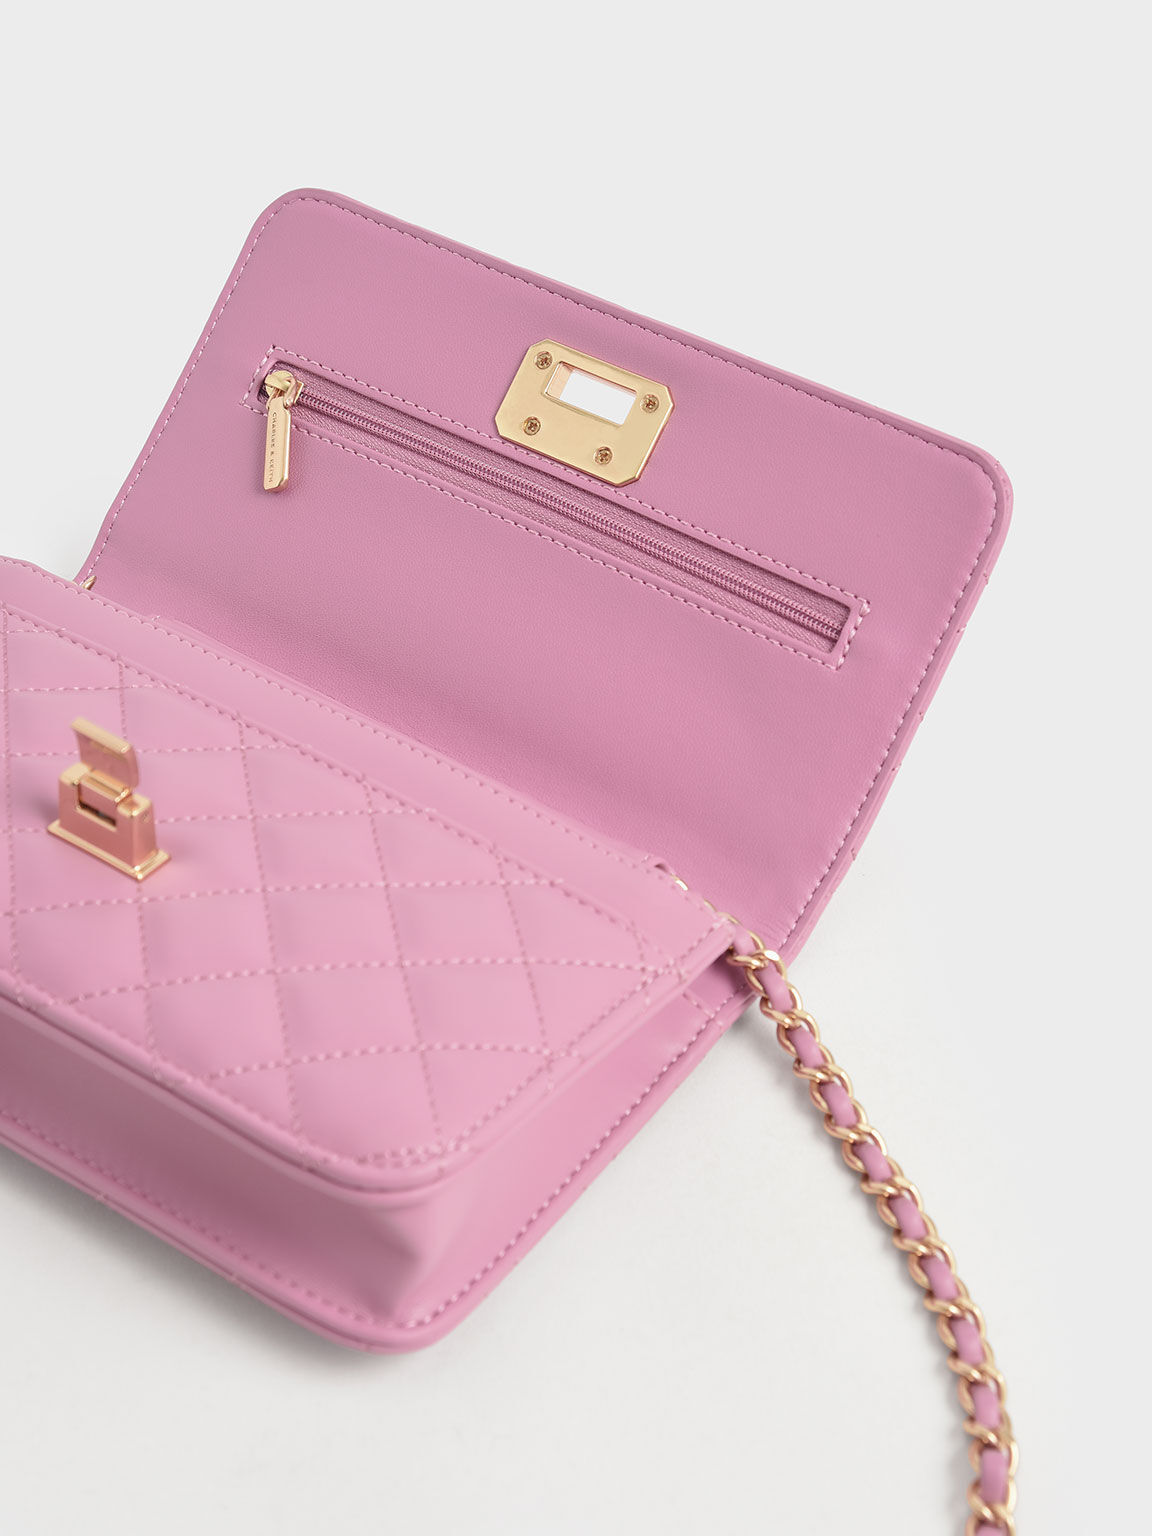 Tas Clutch Quilted Push-Lock, Pink, hi-res